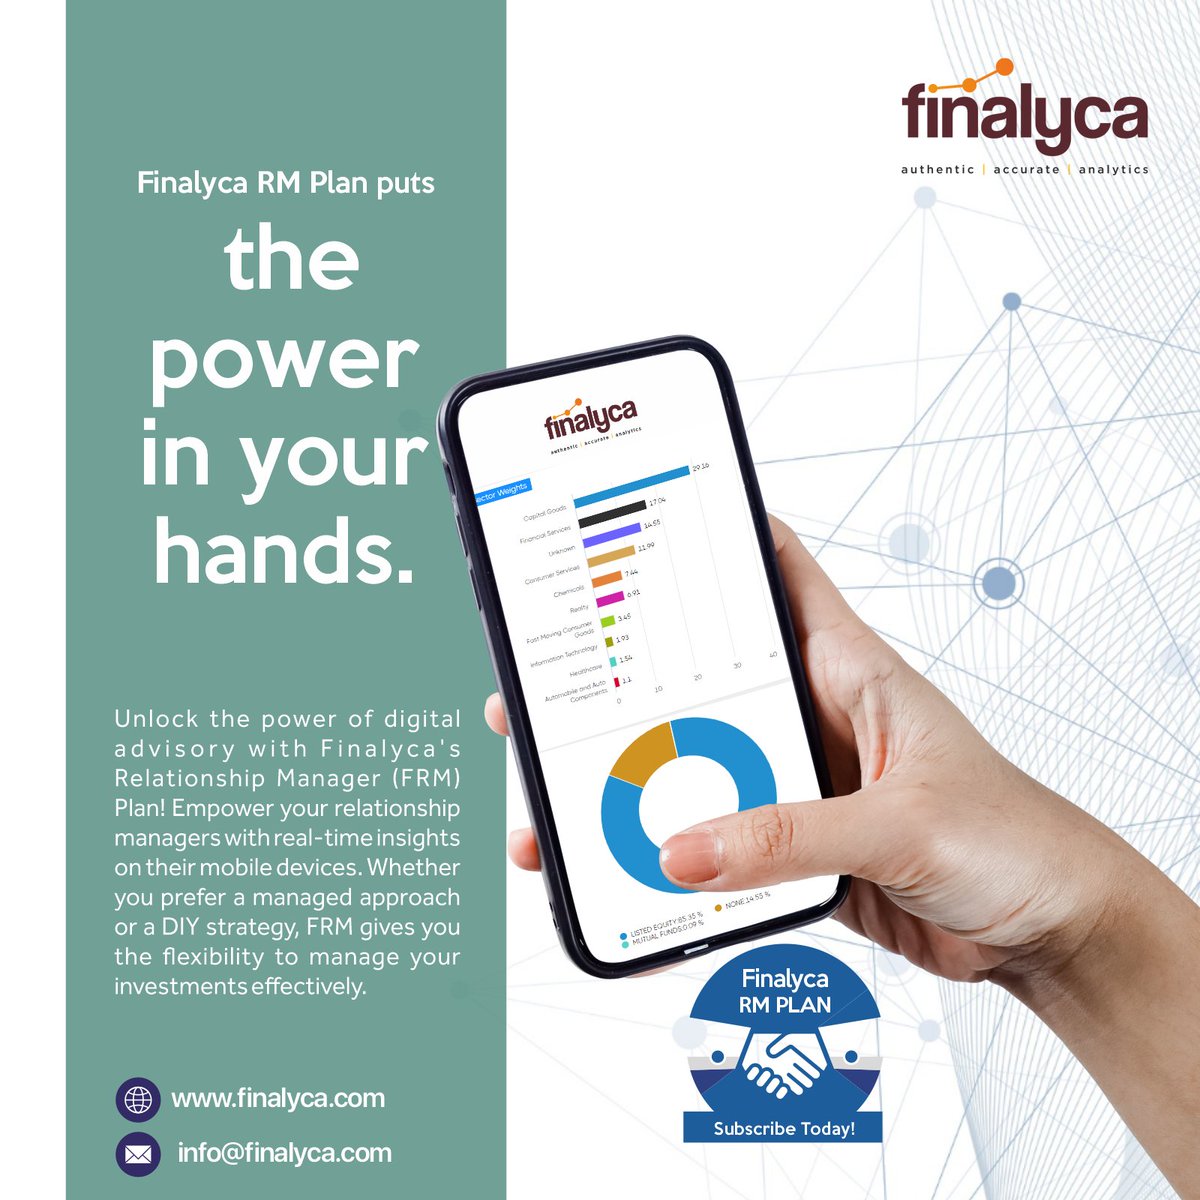 Unlock the power of digital advisory with Finalyca's Relationship Manager (FRM) Plan

Take control of your financial future today!

Get a free demo at finalyca.com

#Finalyca #FRM #DigitalAdvisory #InvestmentManagement
#FundManagers #largecap #midcap